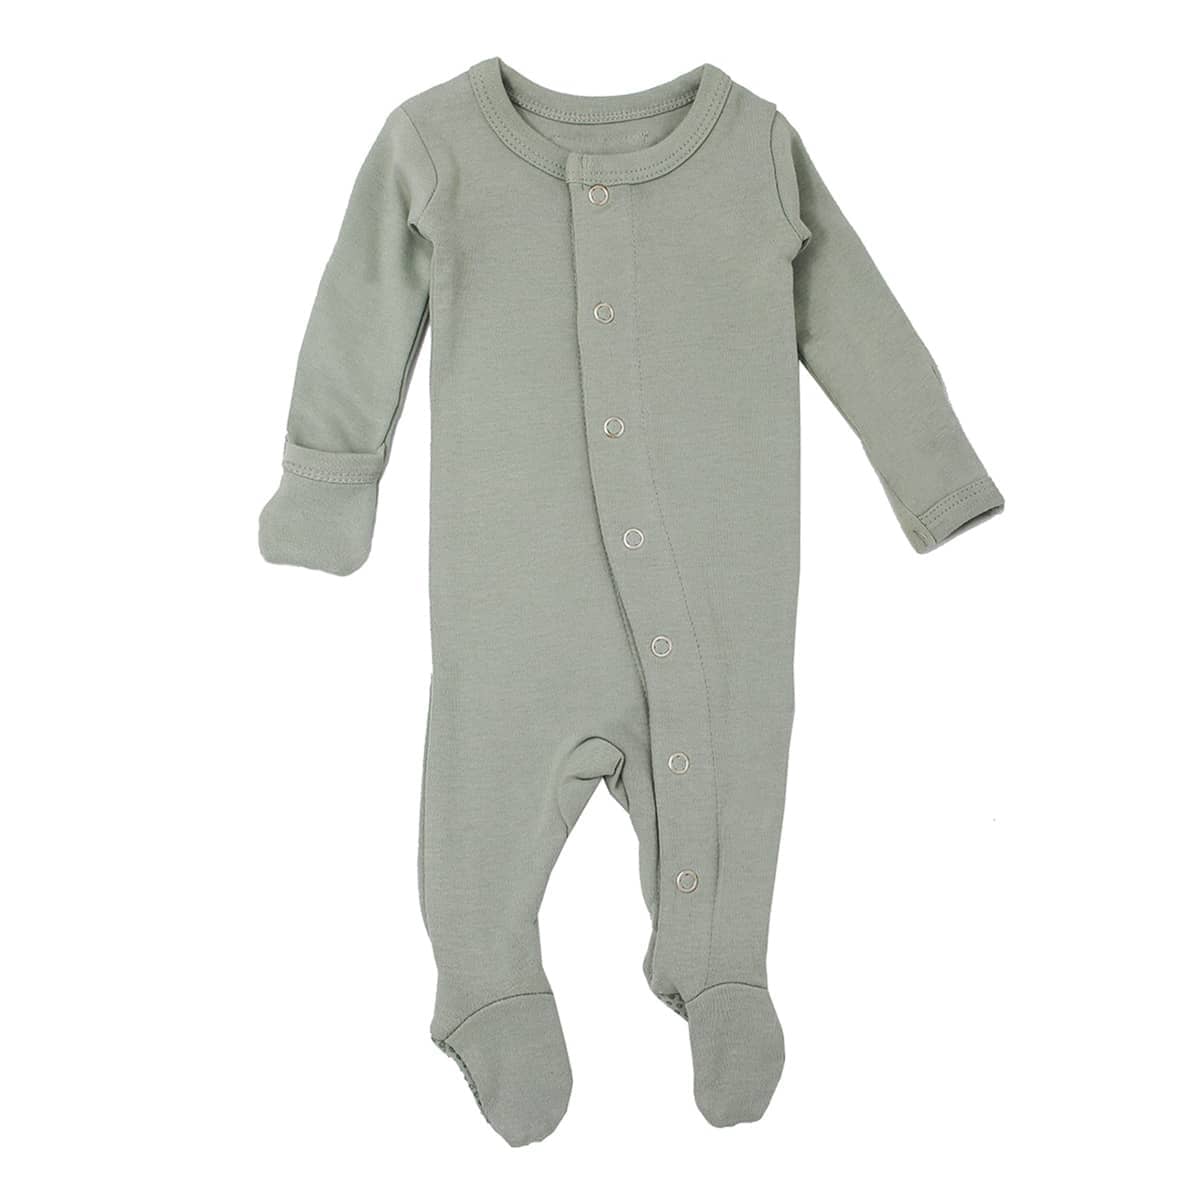 L'ovedbaby Organic Gl'oved Footed Overall - Seafoam